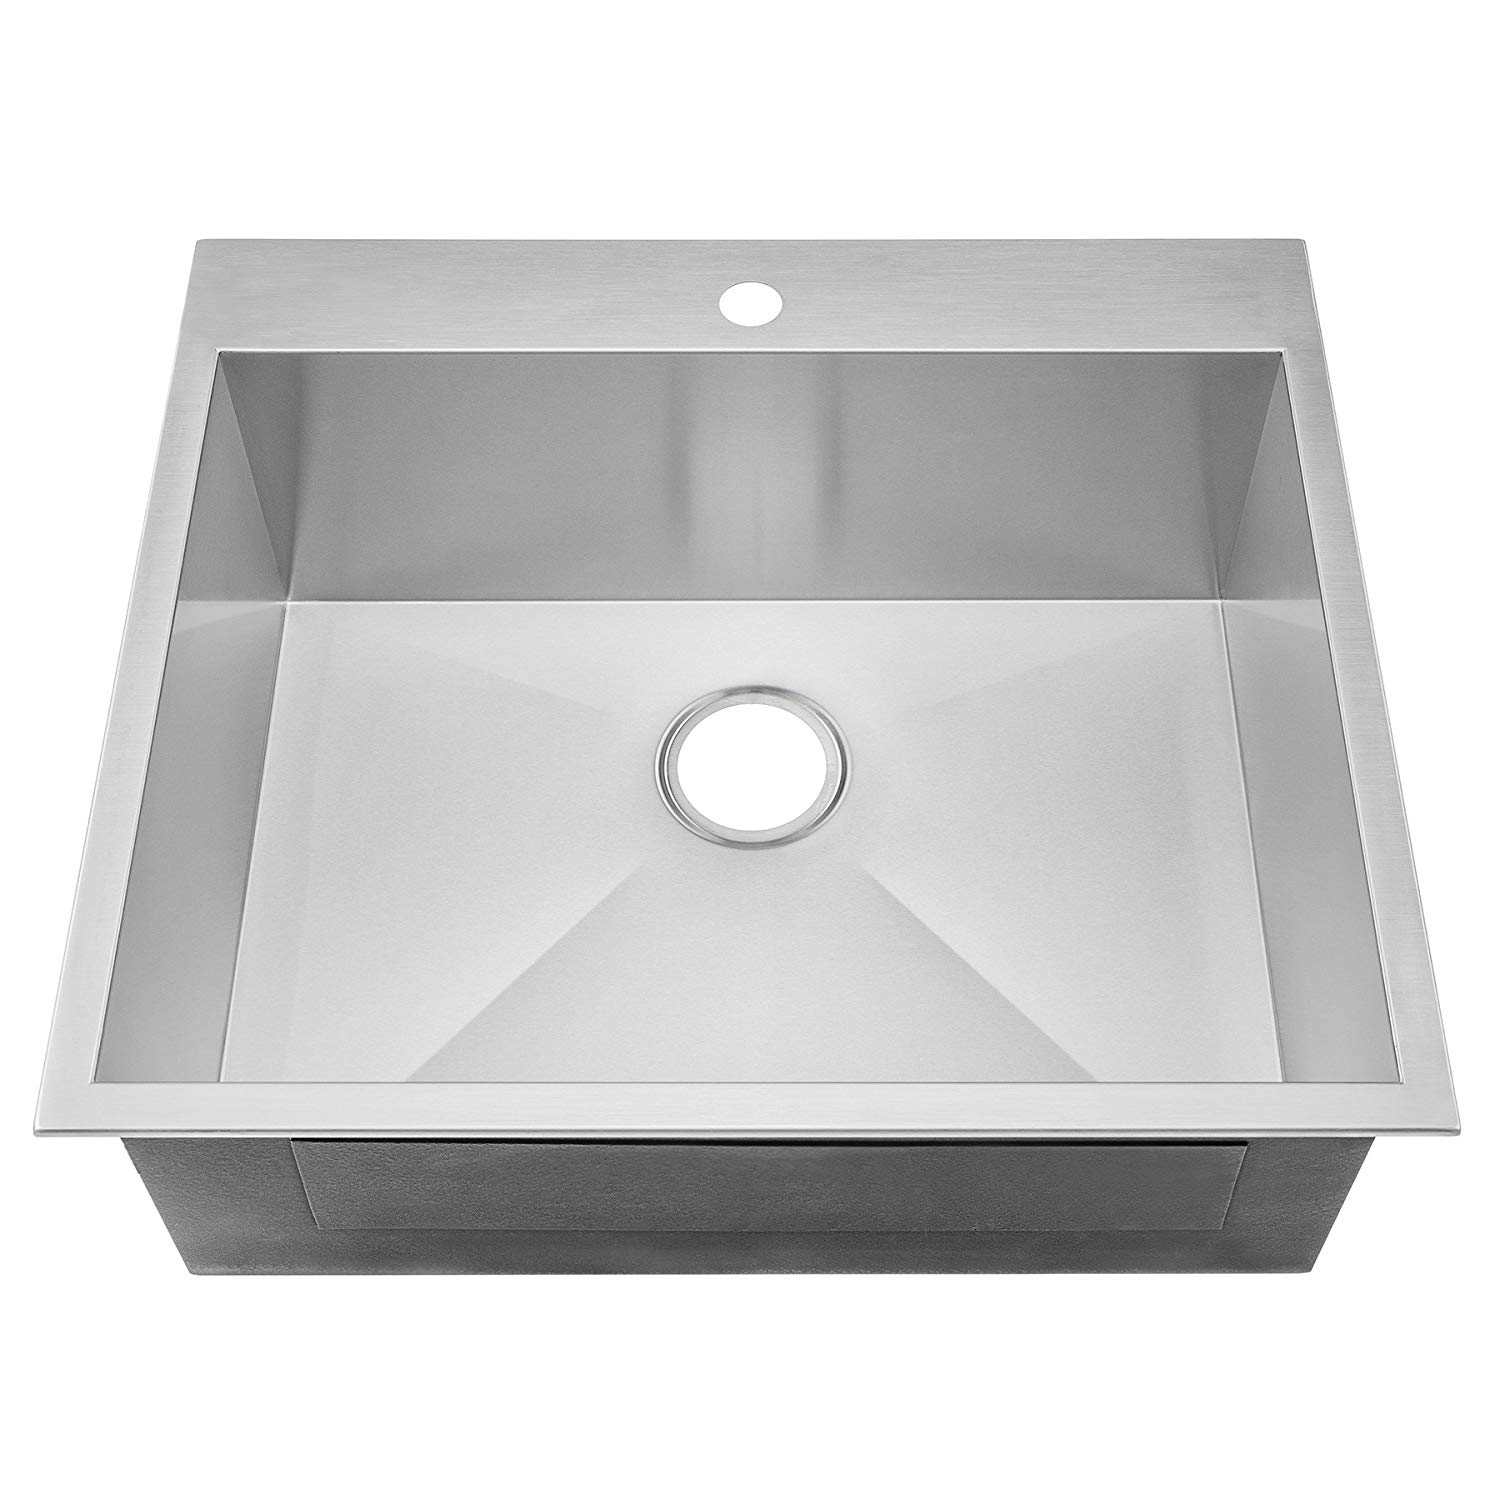 Stainless Steel Handmade Dual Mount Drop In Topmount Kitchen Sink with Faucet Hole